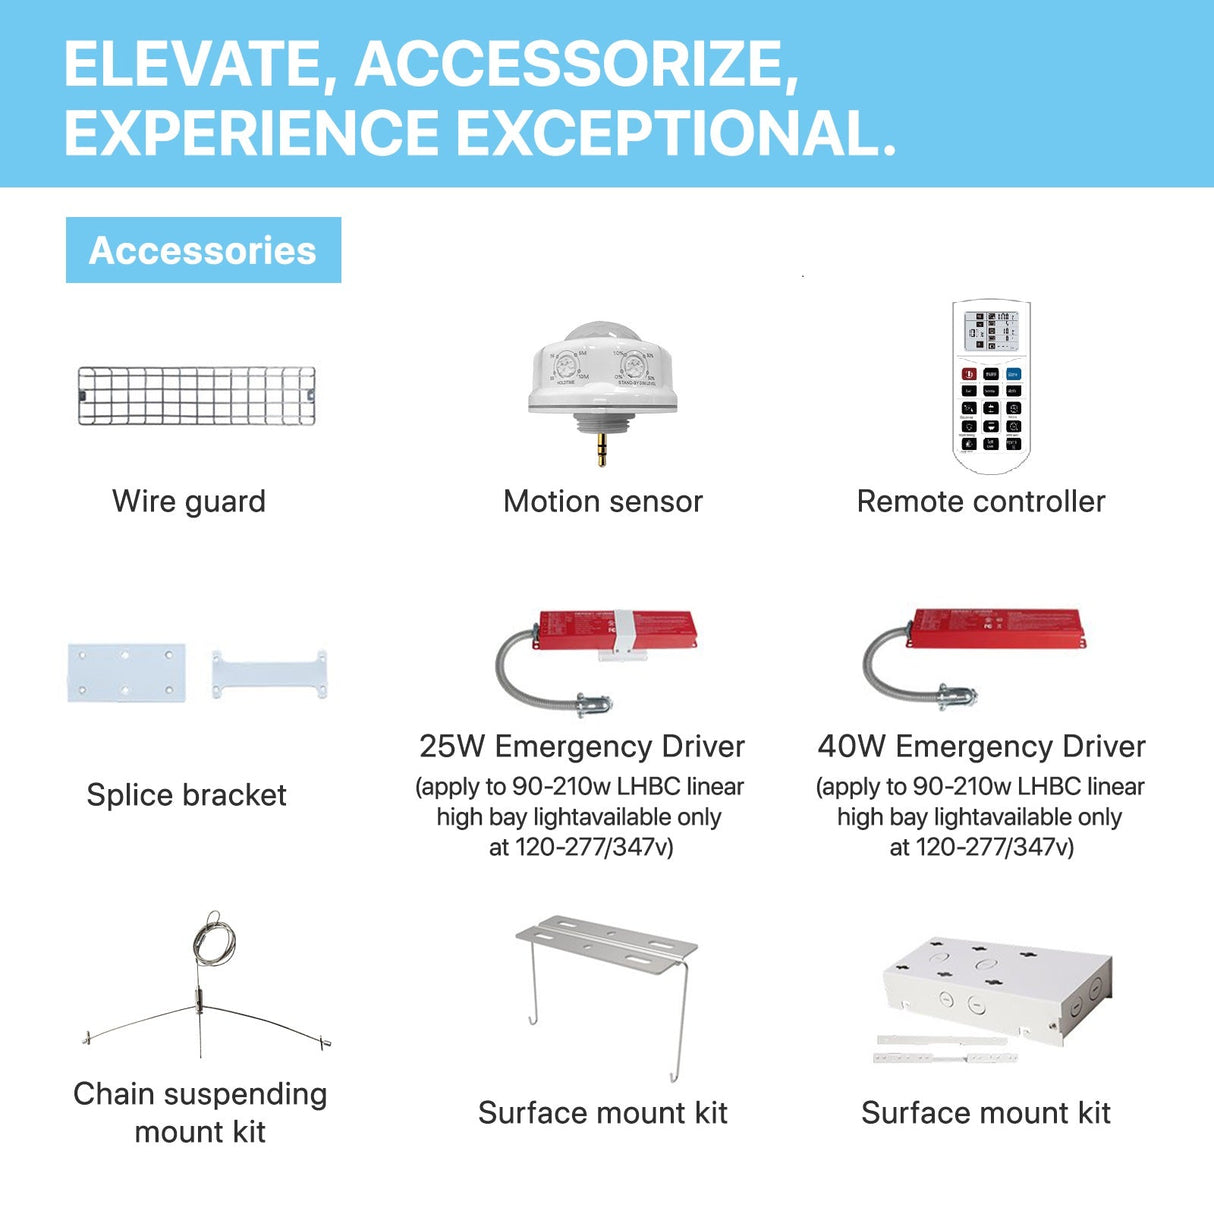 optional accessories for linear high bay lights: wire guard, motion sensor, remote controller, splice bracket, emergency, surface mount kit and pendant mount kit.